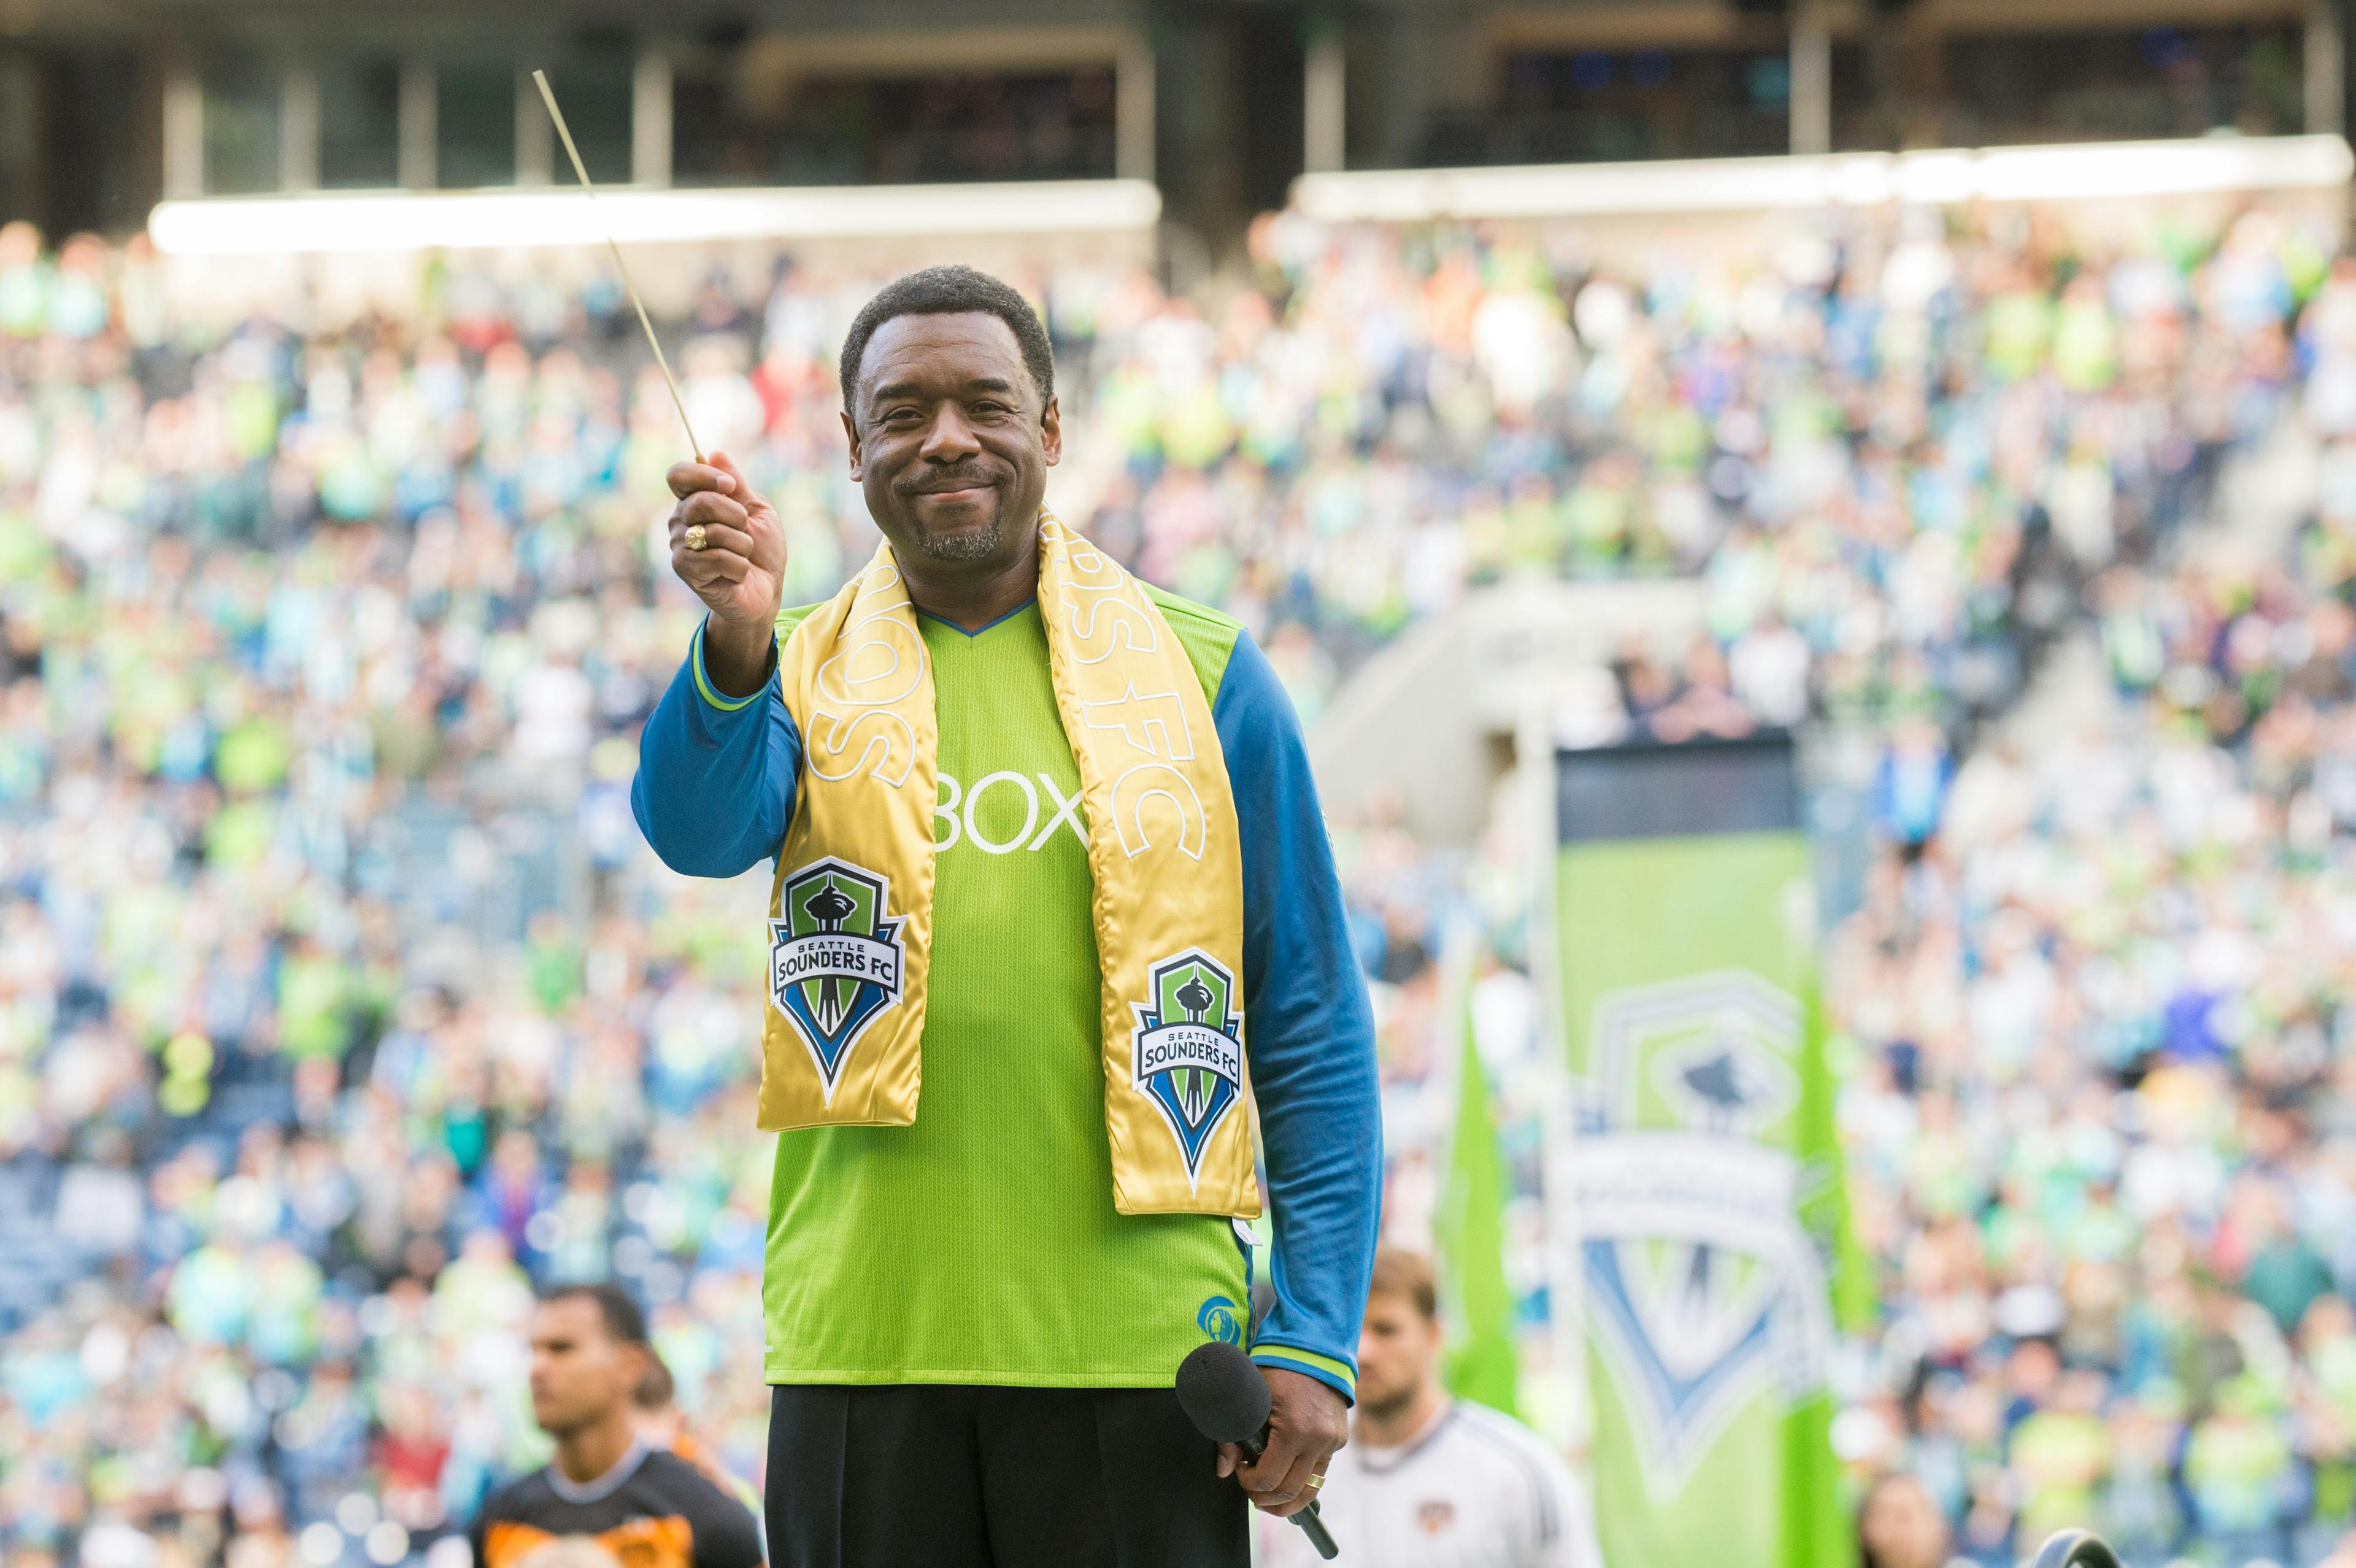 Stephen Newby conducts the National Anthem before a Seattle Sounders game wearing his Golden Scarf